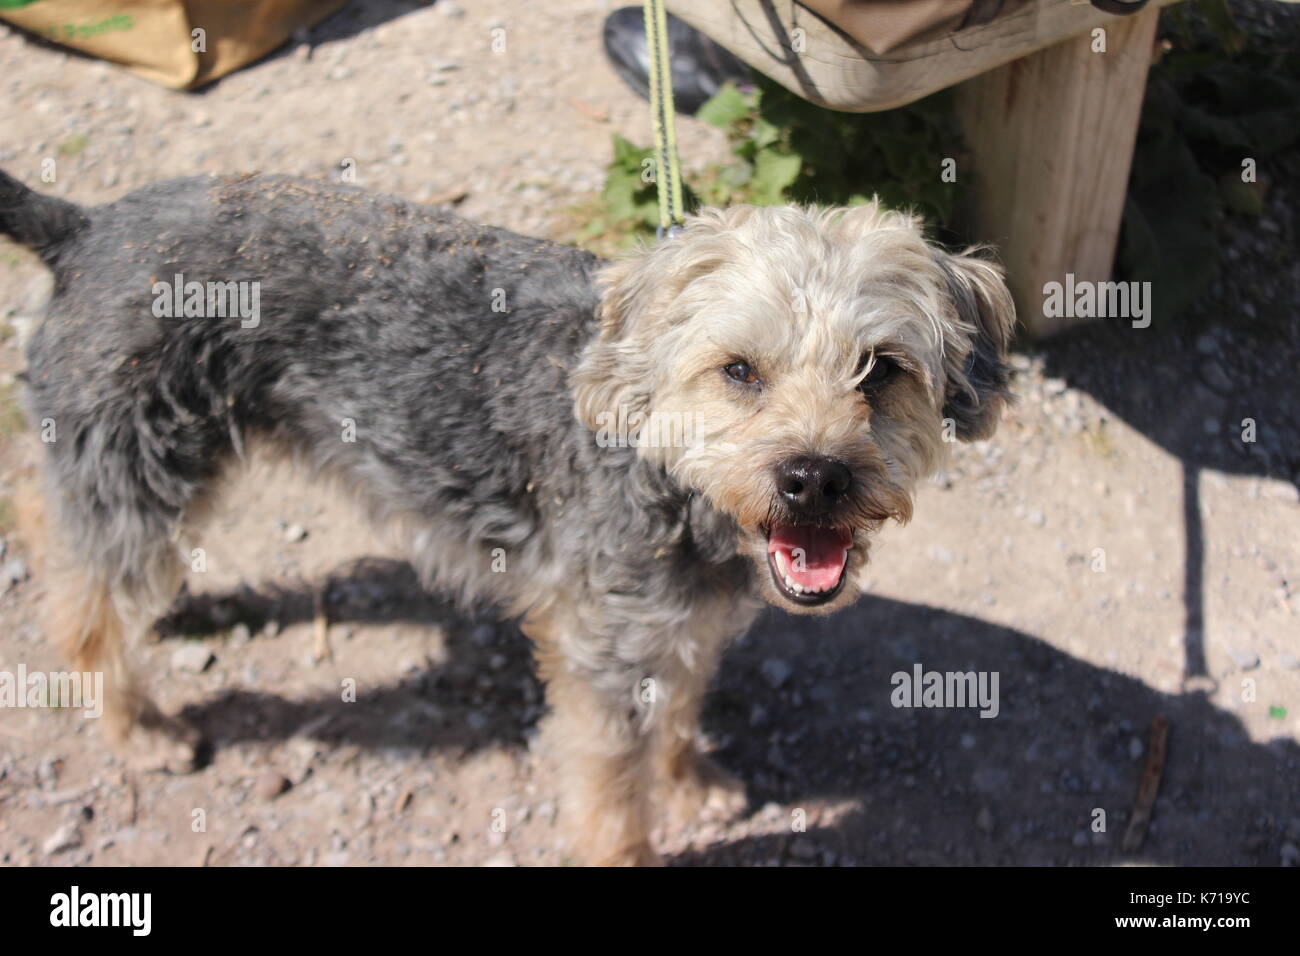 Border terrier poodle stock photography and images - Alamy